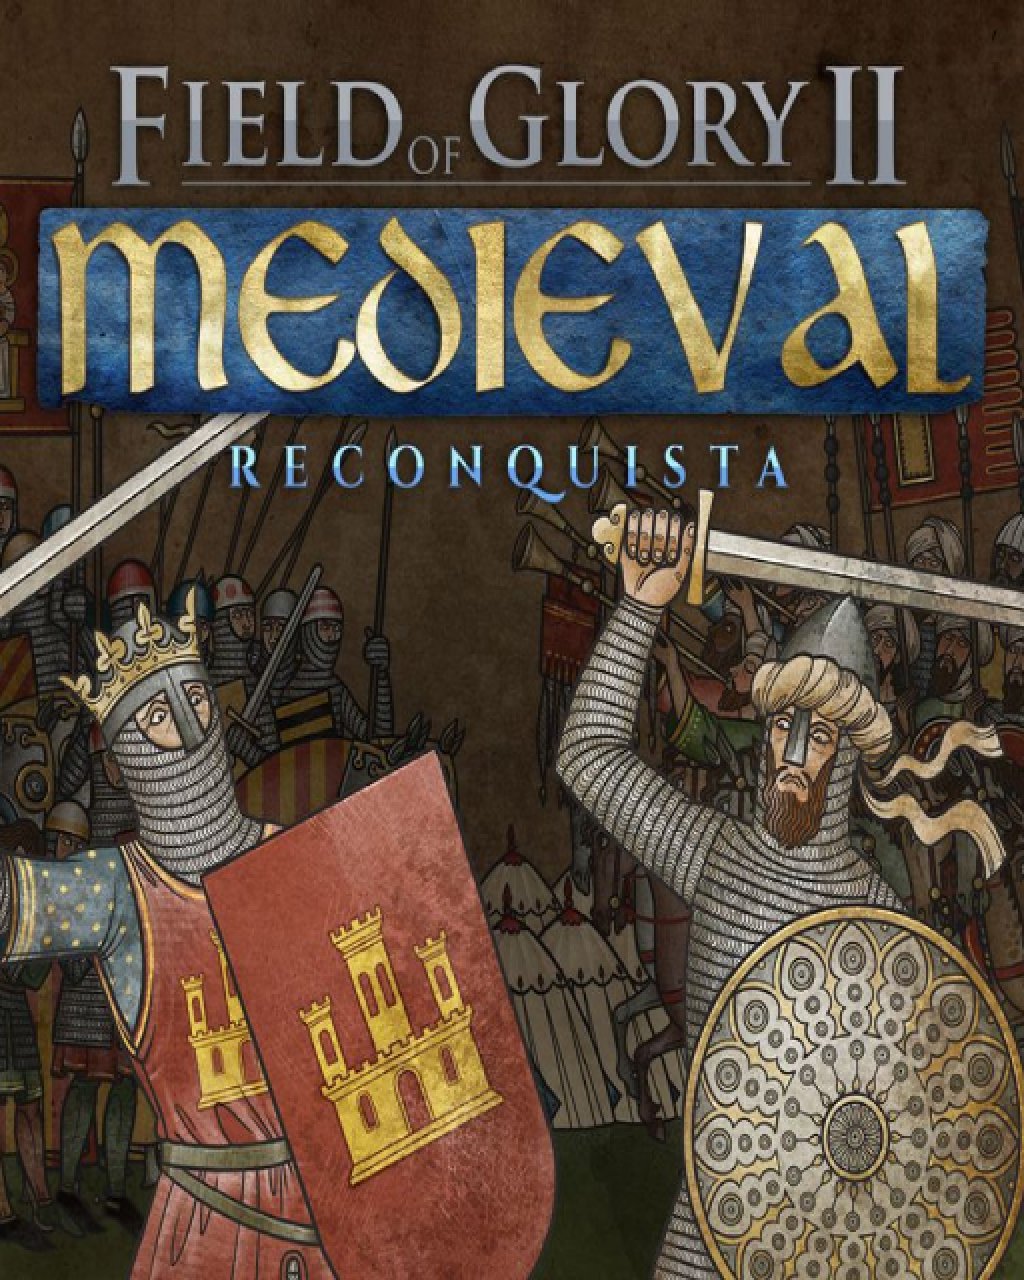 Field of Glory II Medieval Reconquista